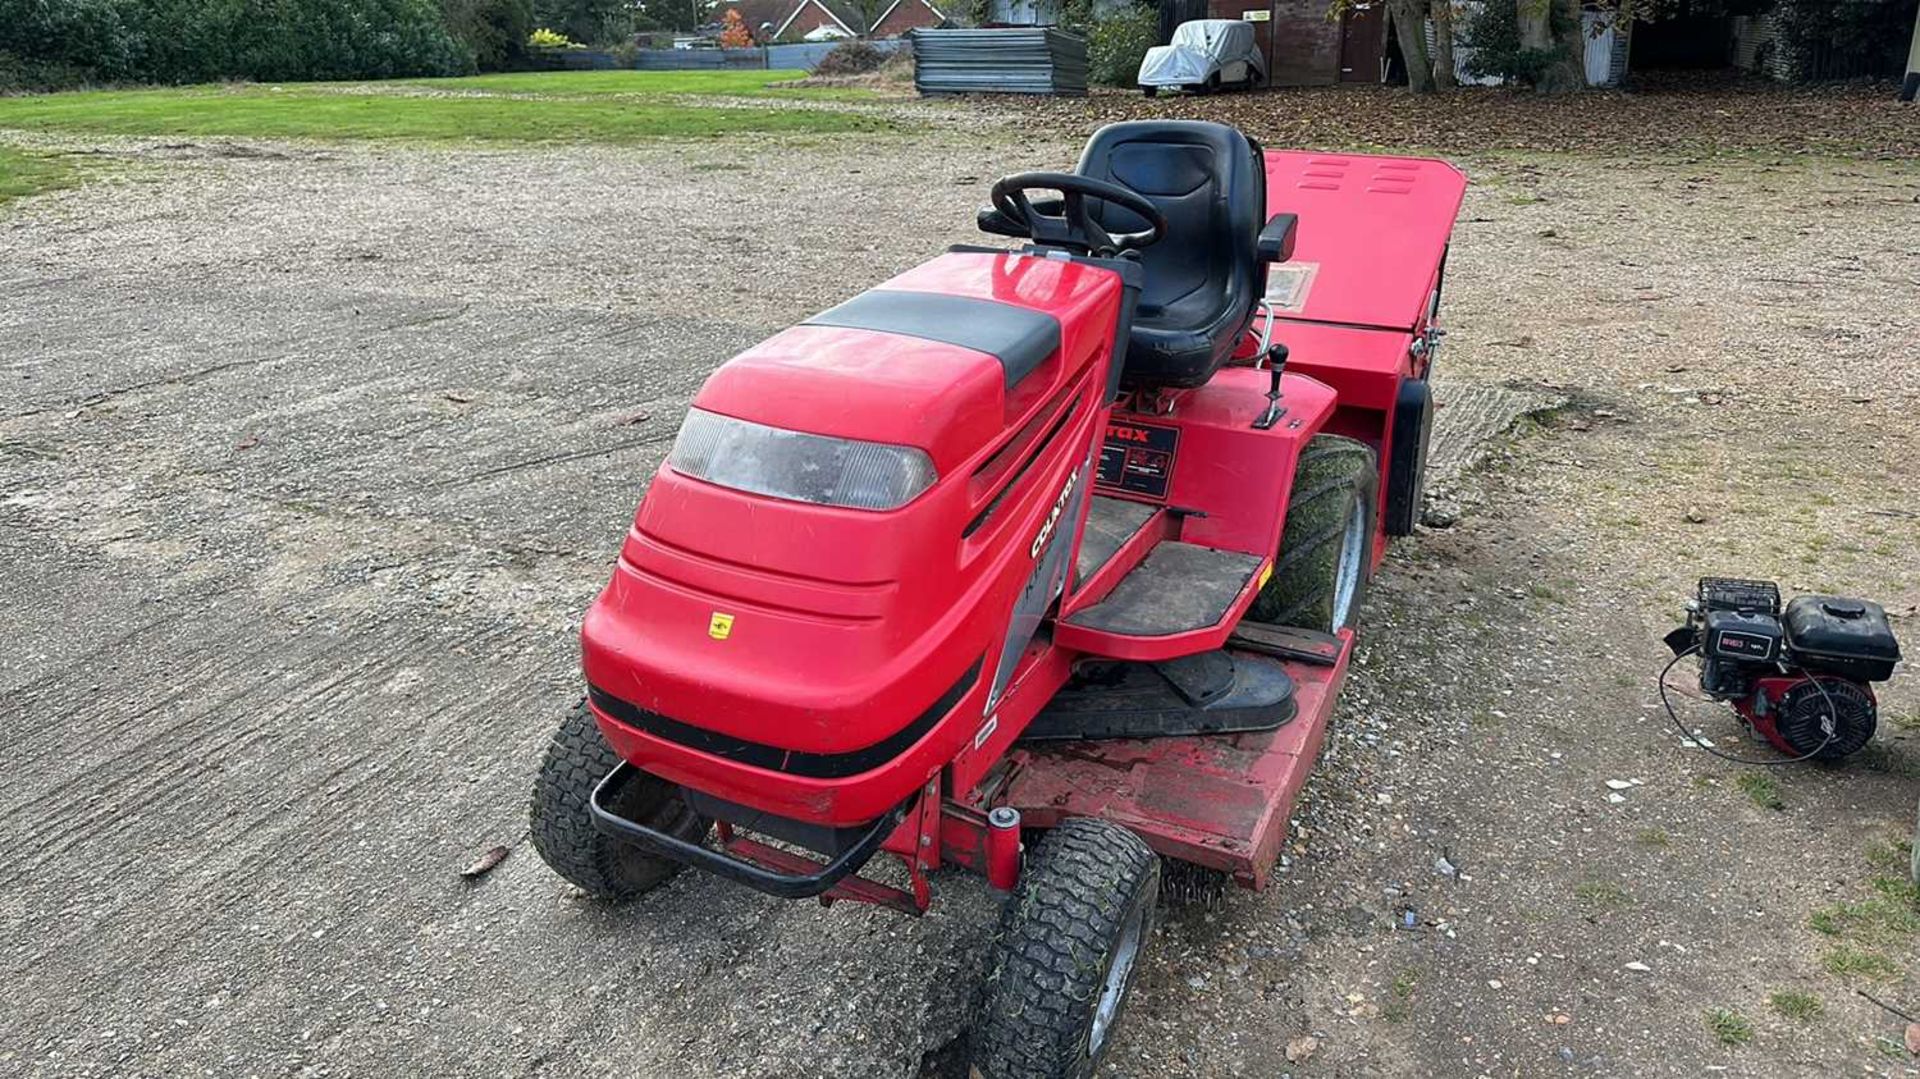 Countax K18-50 Garden Tractor / ride-on Mower, complete with collection box - Image 2 of 10